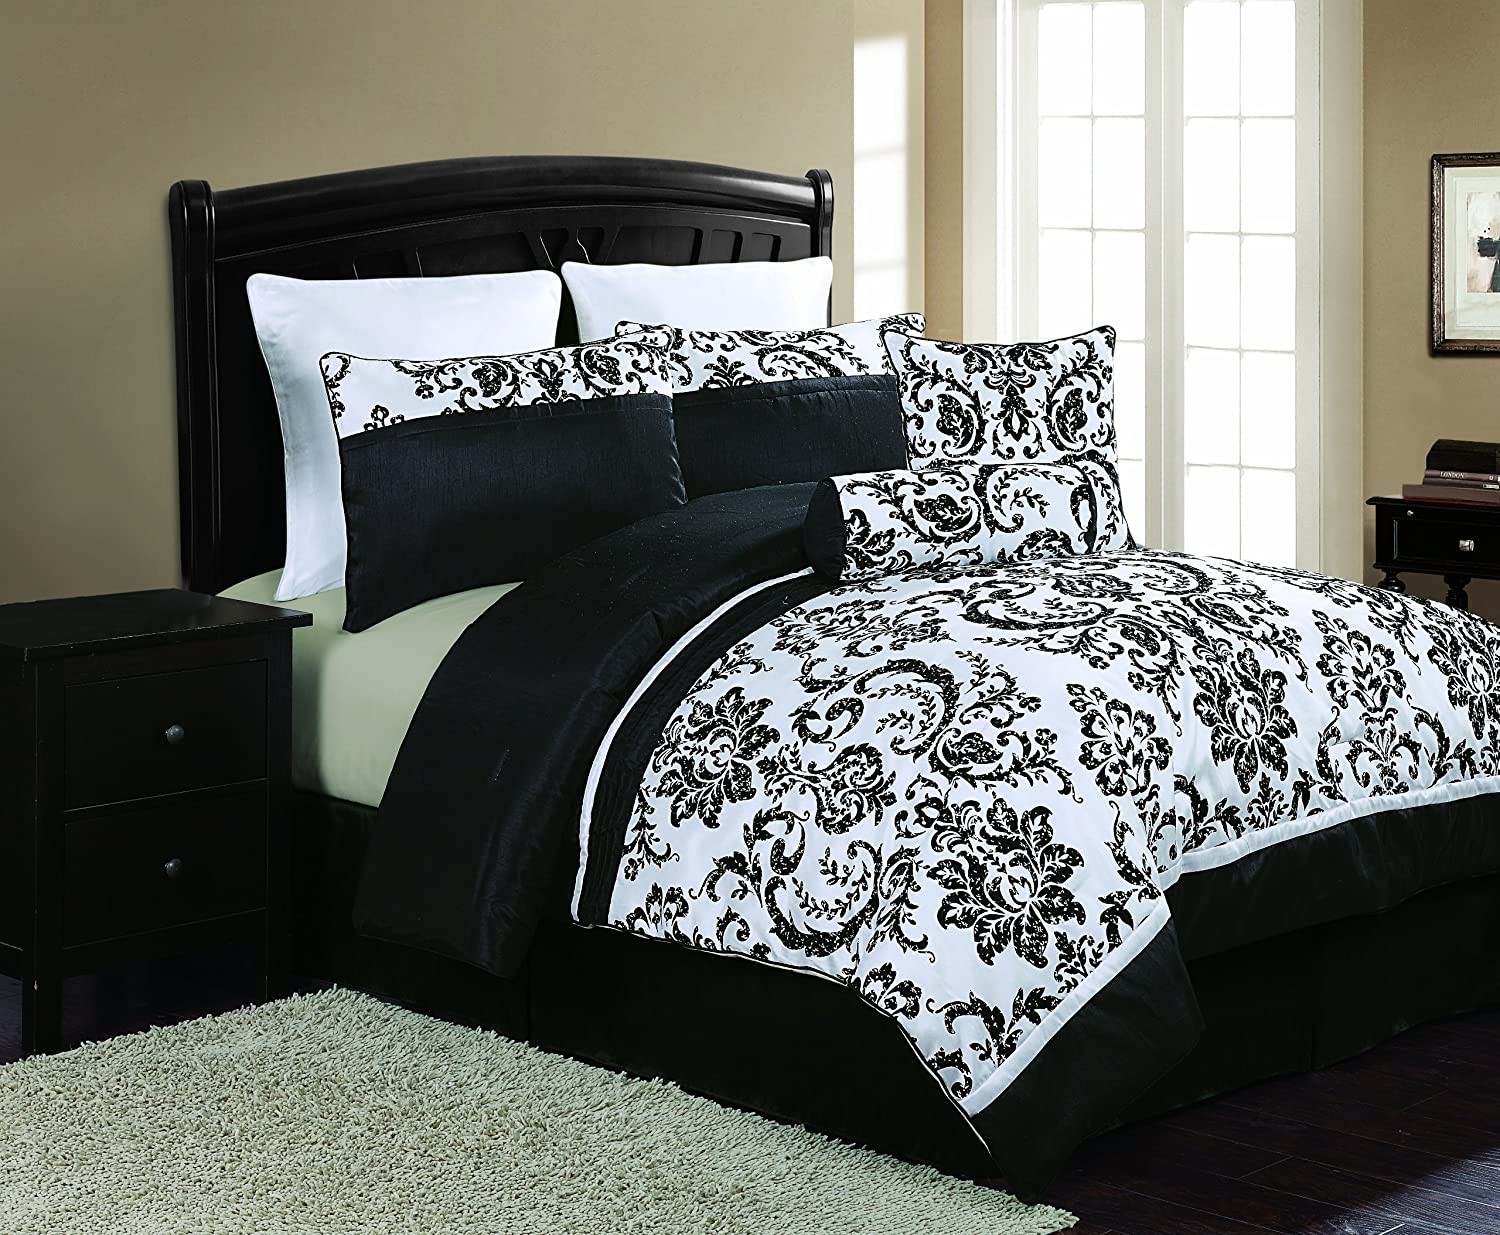 Black and white bedding sets elegant decor and style